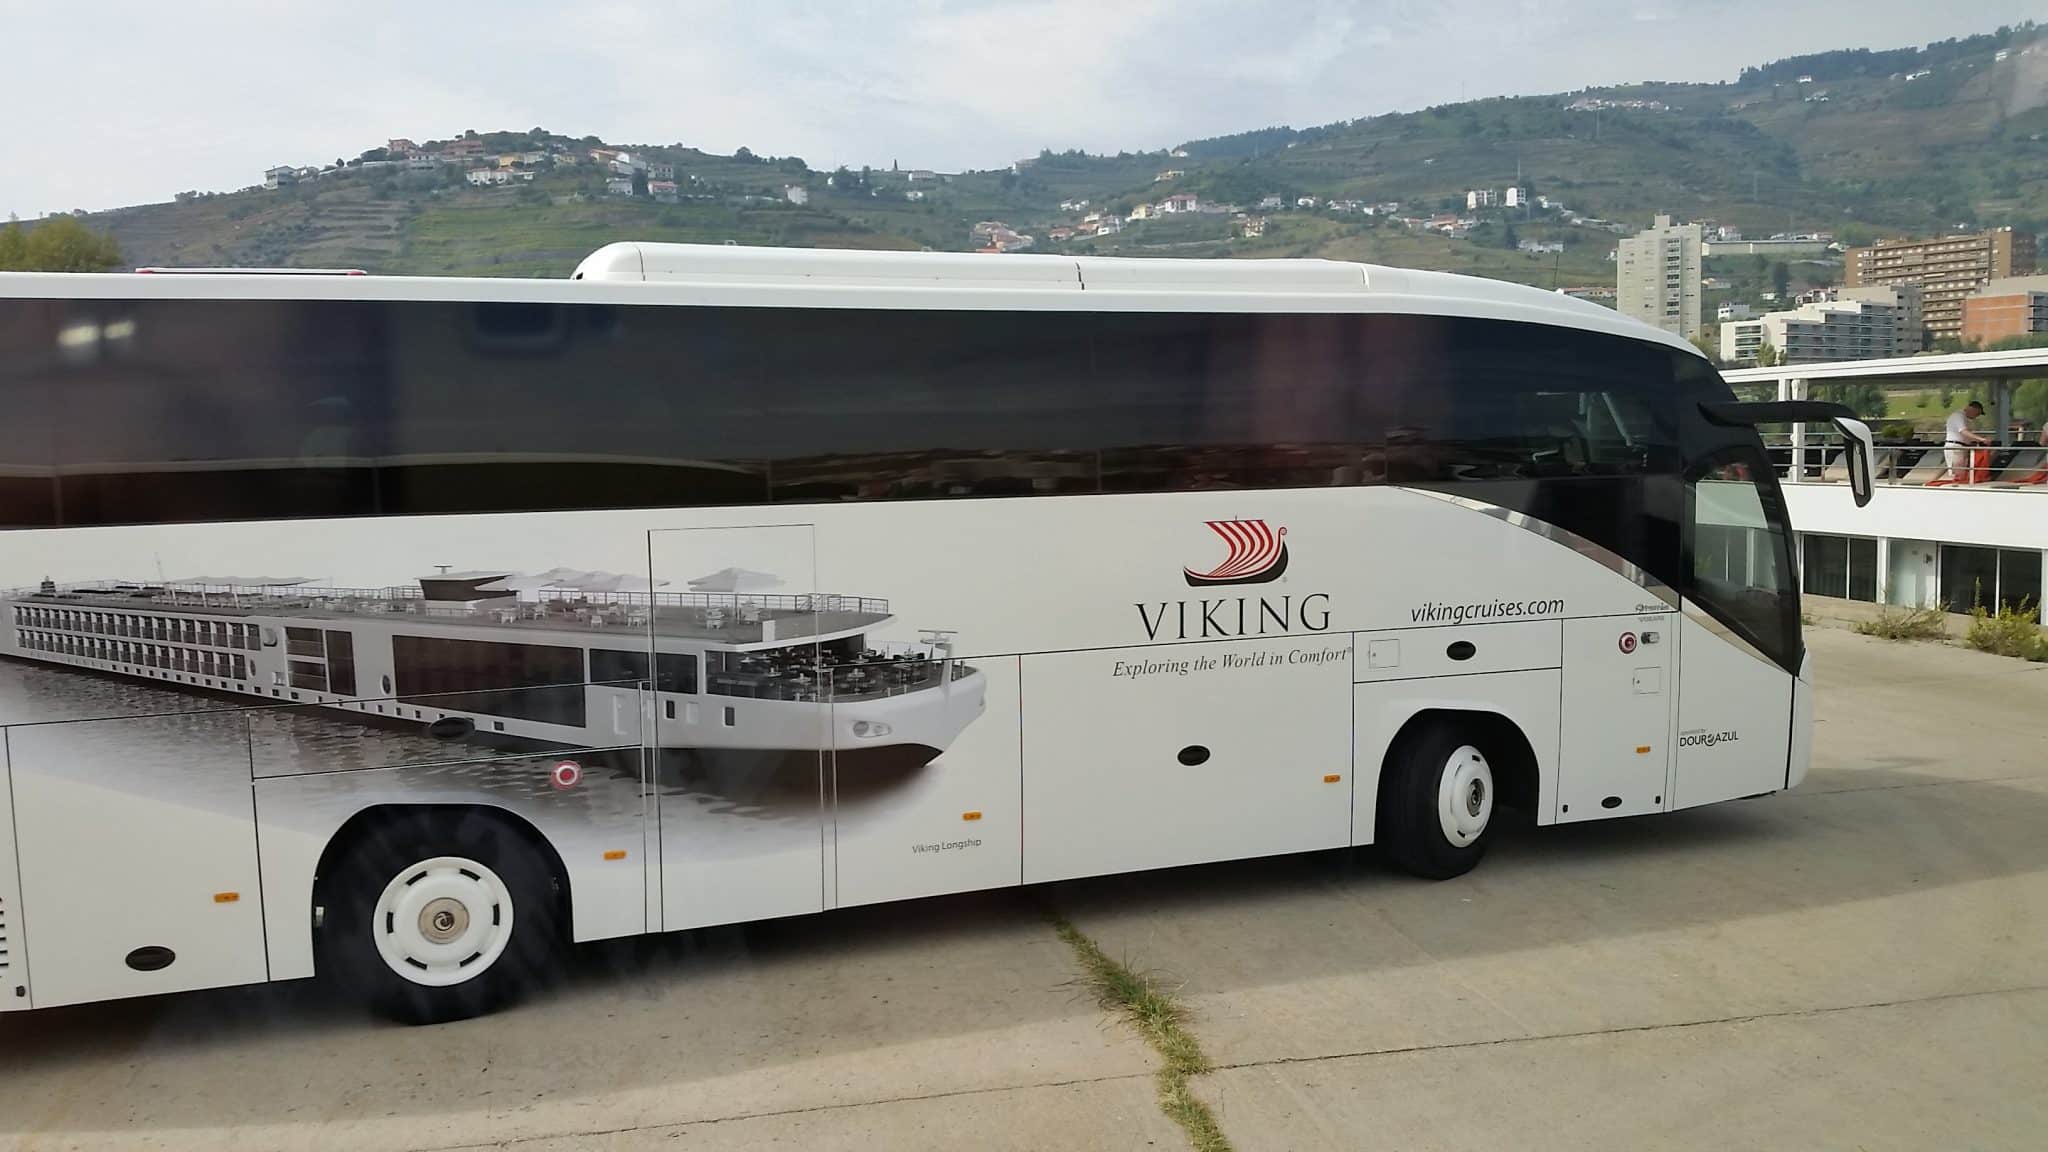 Viking river cruise tour bus in Portugal